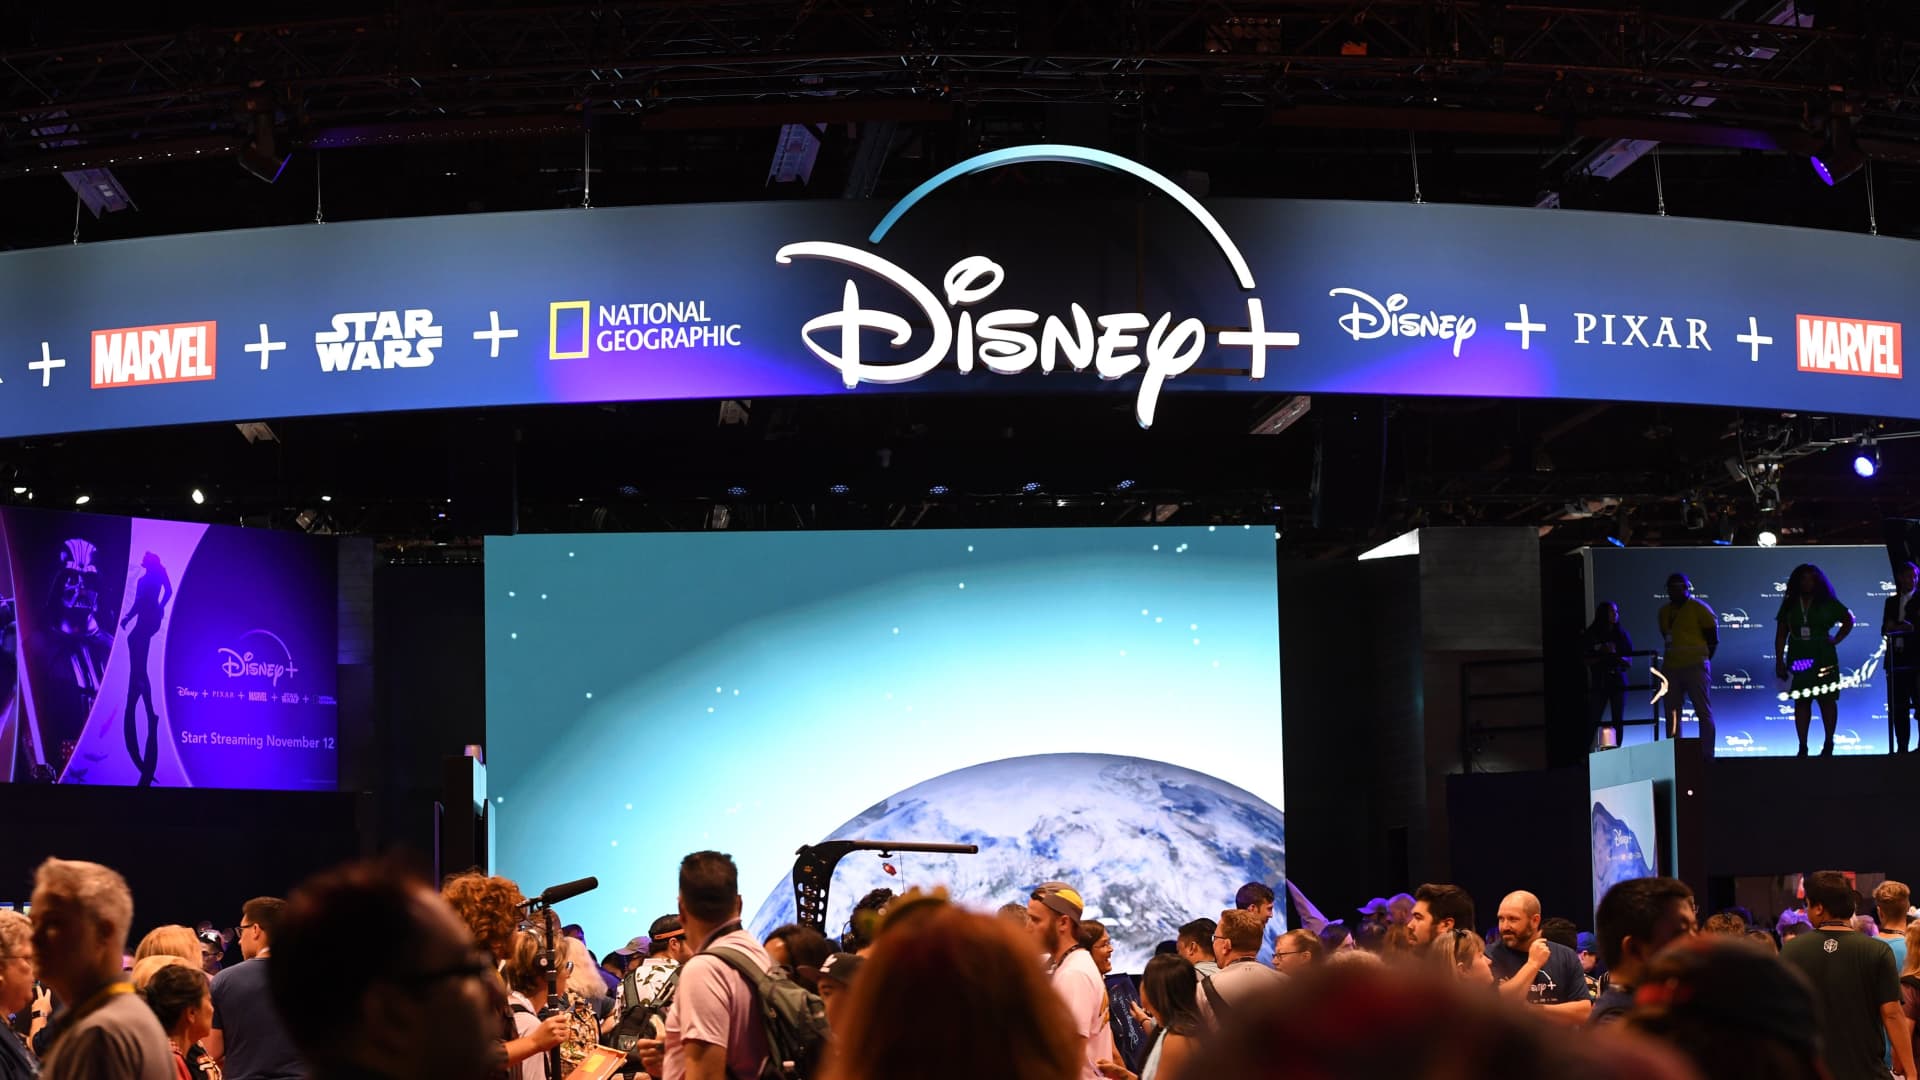 Attendees visit the Disney+ streaming service booth at the D23 Expo on August 23, 2019 at the Anaheim Convention Center in Anaheim, California.